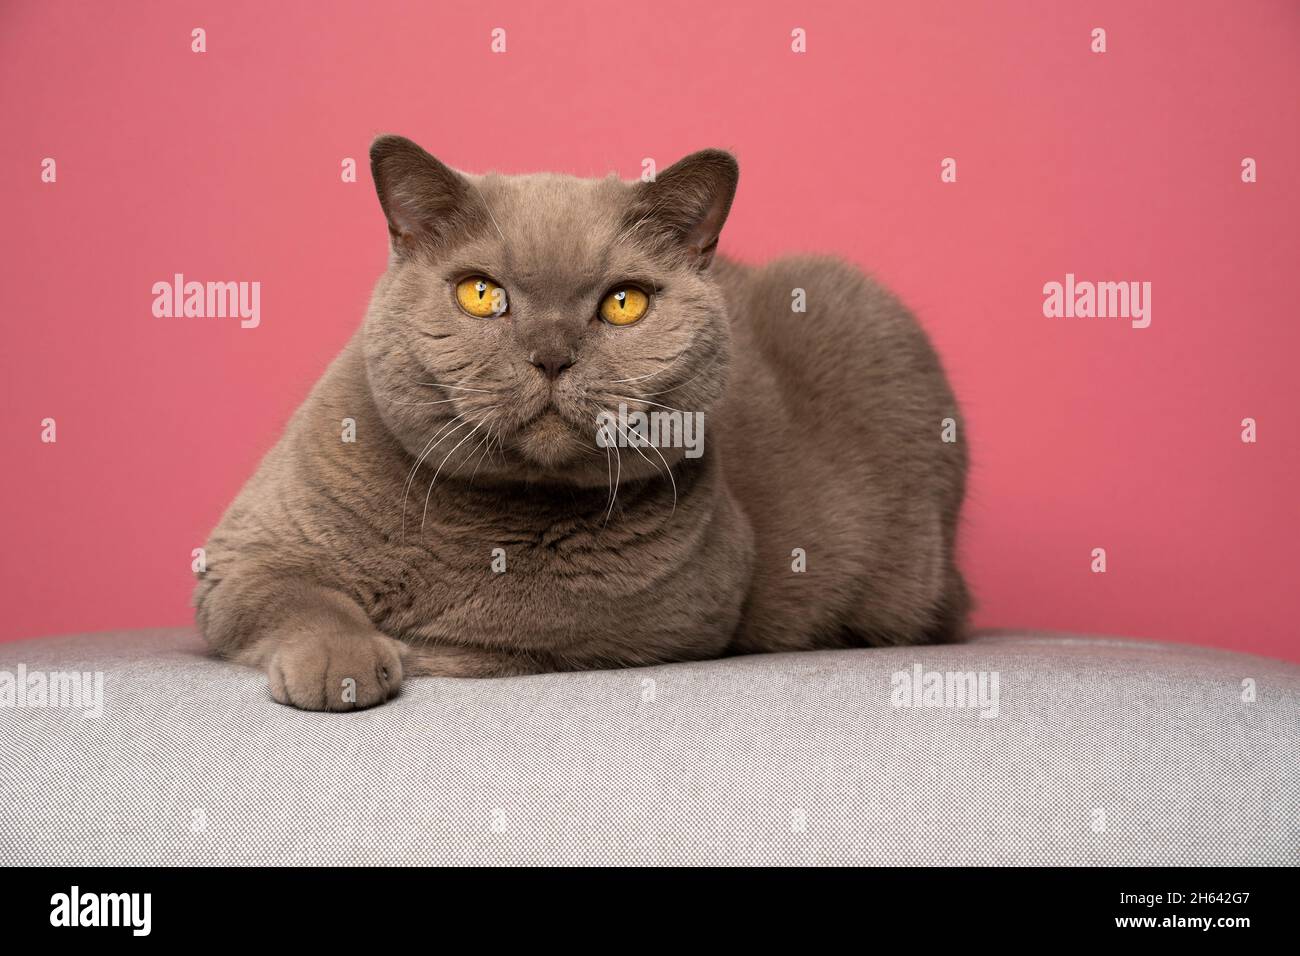 fluffy lilac british shorthair cat resting on couch looking at camera portrait on pink background with copy space Stock Photo